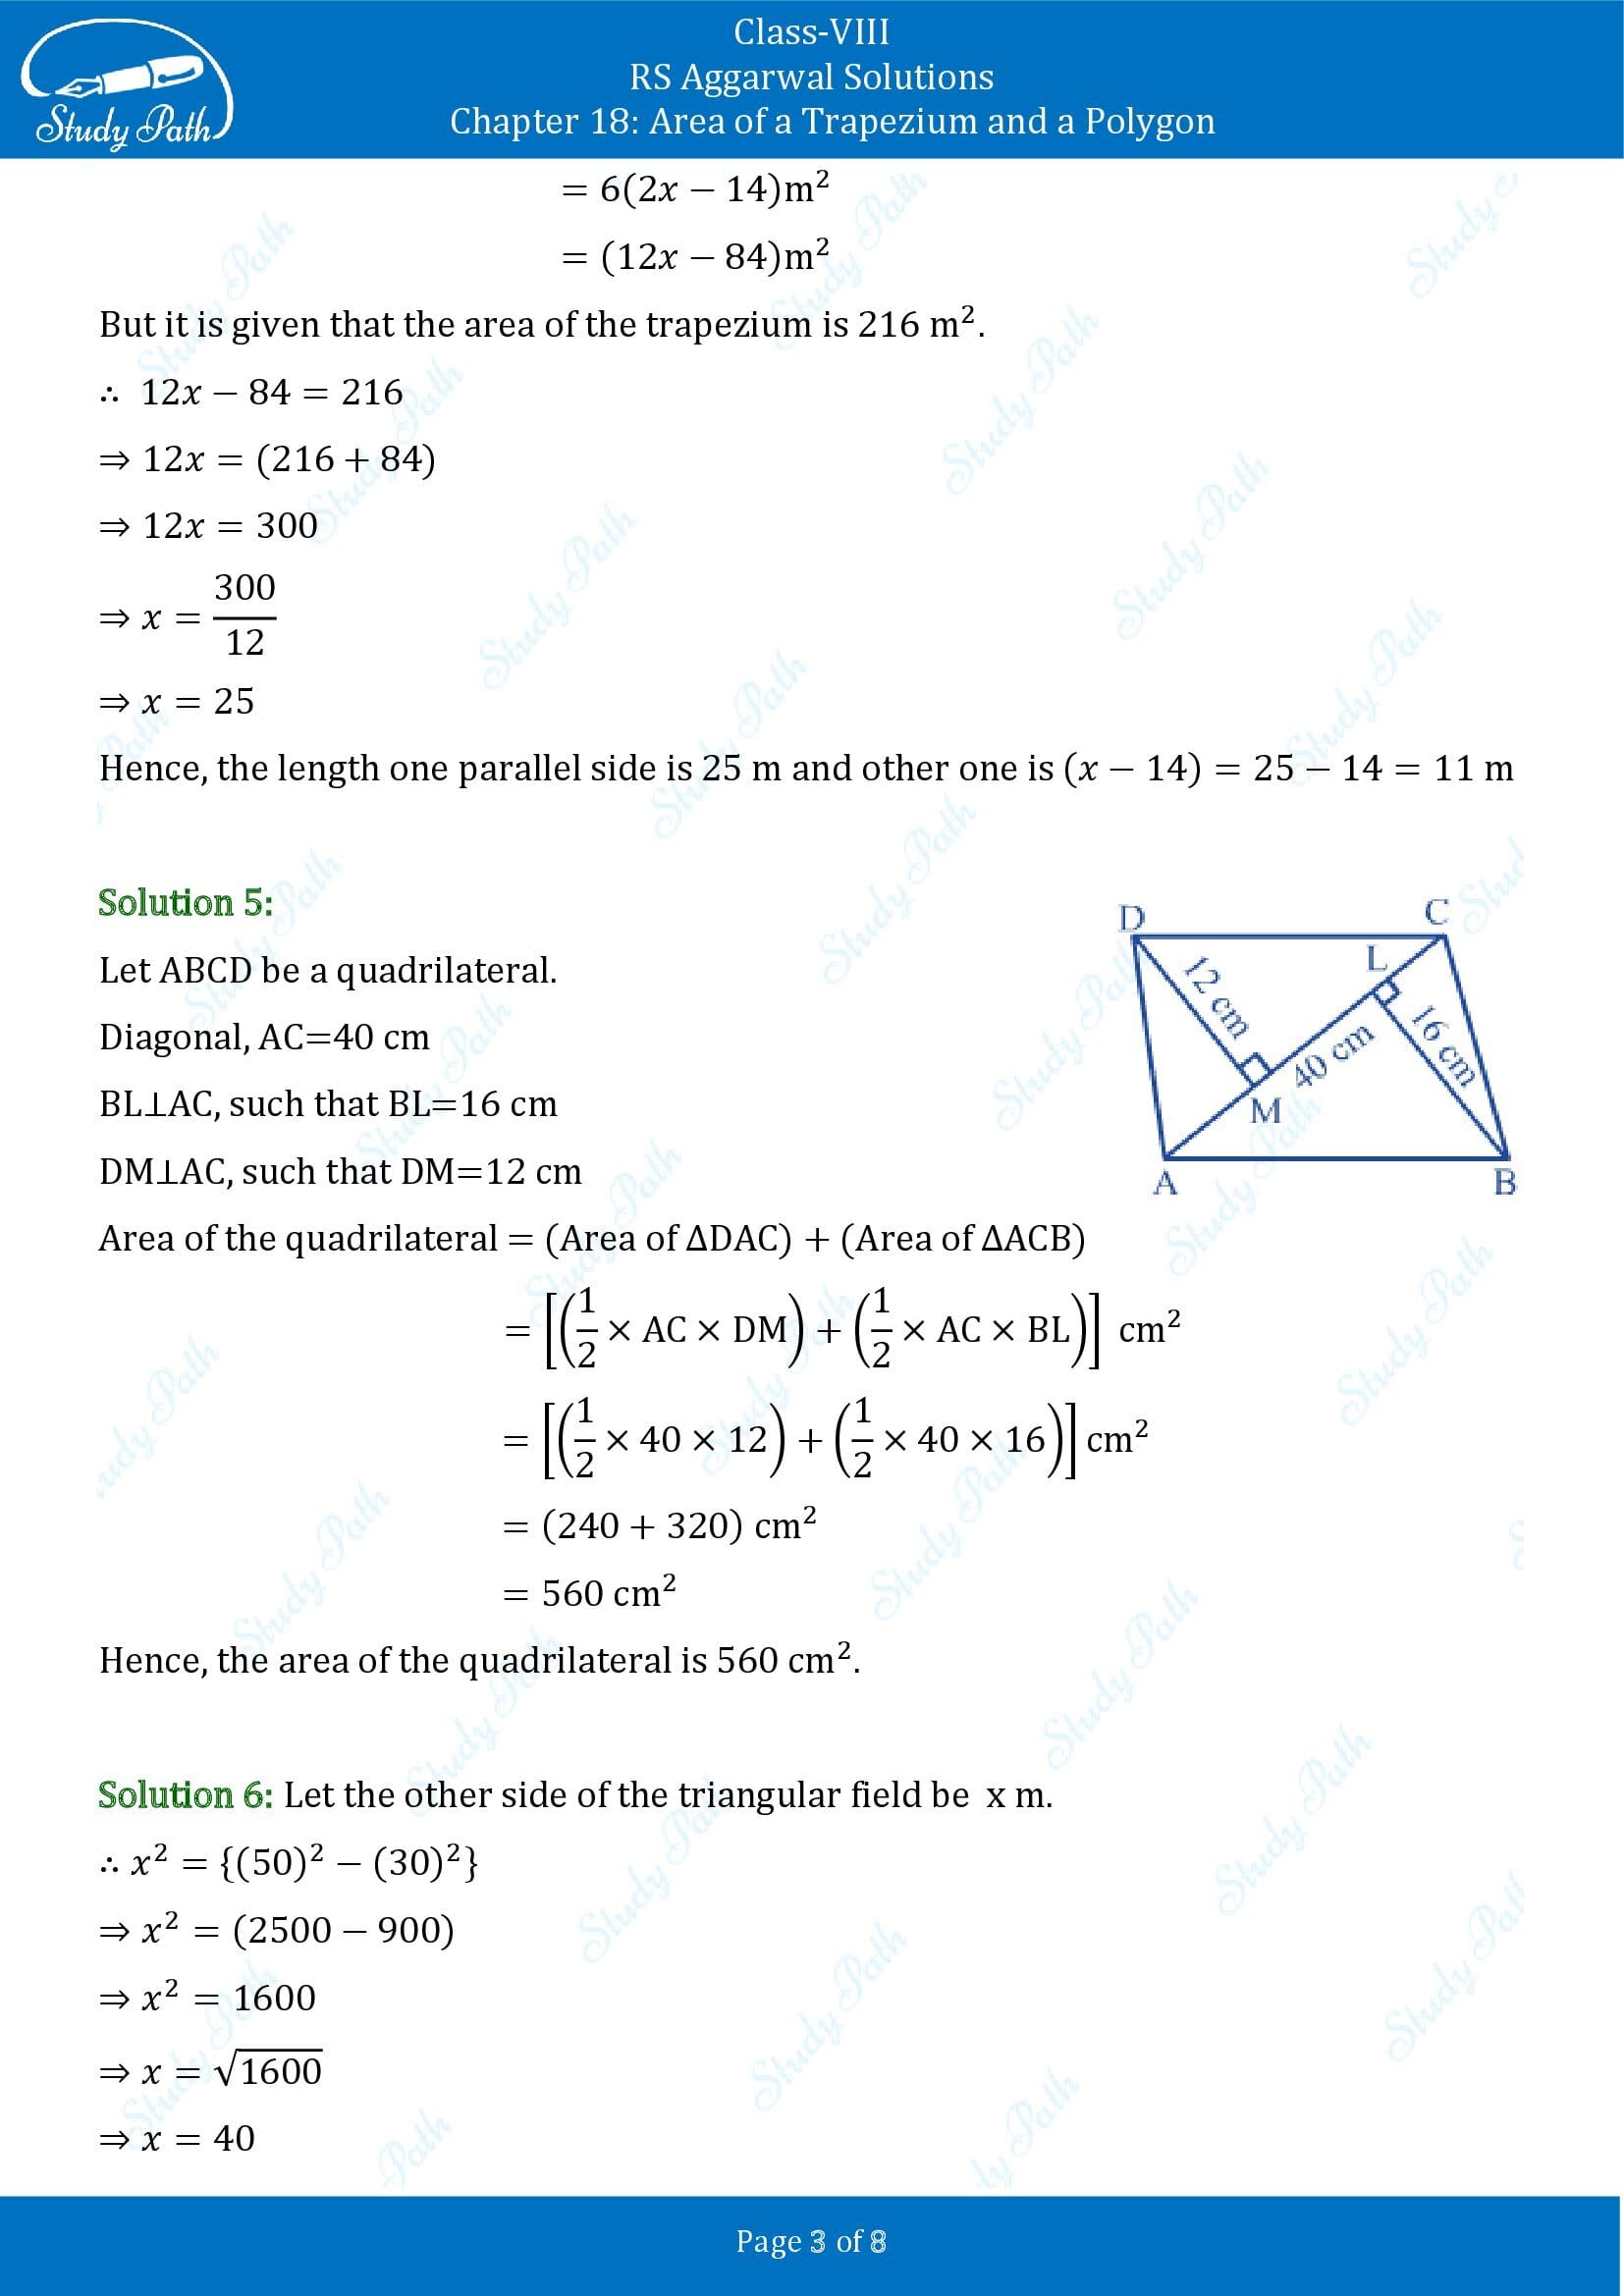 RS Aggarwal Solutions Class 8 Chapter 18 Area of a Trapezium and a Polygon Test Paper 00003